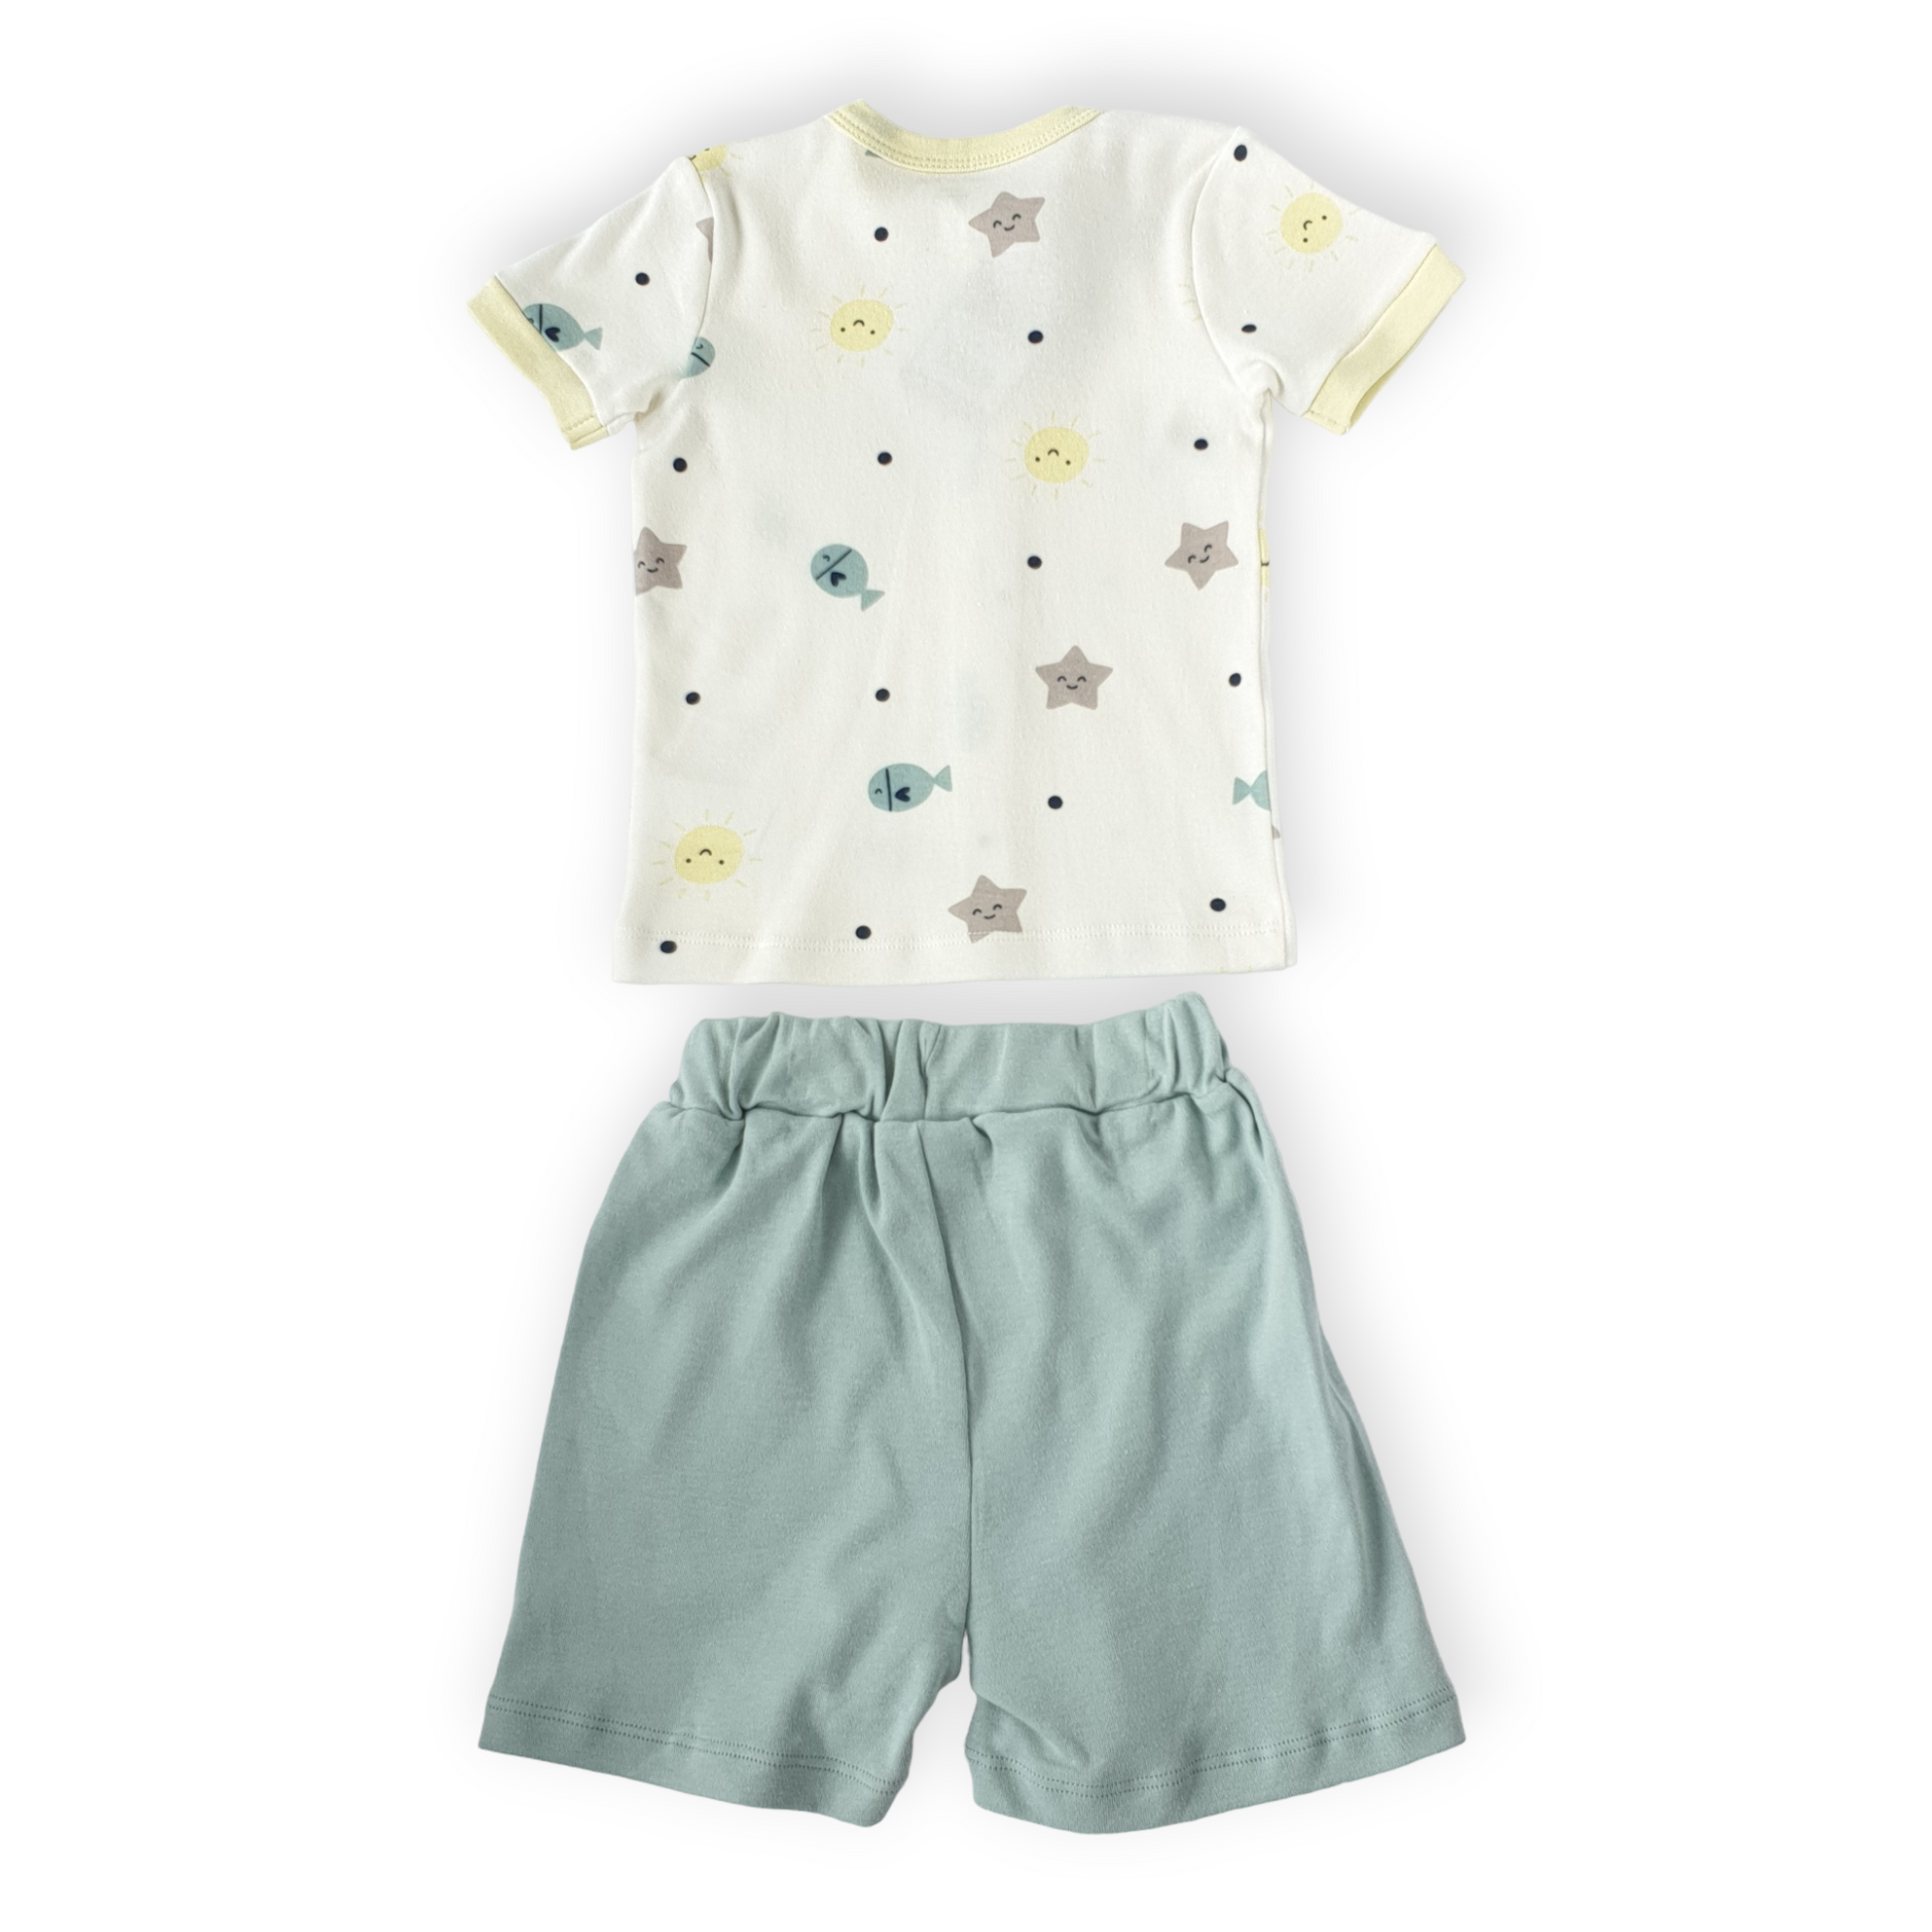 Organic Cotton My Cool Days Set-Boy, Catboy, Catgirl, Catset2pcs, Girl, Green, Set, Short sleeve, Shorts, Smiley, SS23, Stars, Sun, Top, White, Yellow-Mother Love-[Too Twee]-[Tootwee]-[baby]-[newborn]-[clothes]-[essentials]-[toys]-[Lebanon]